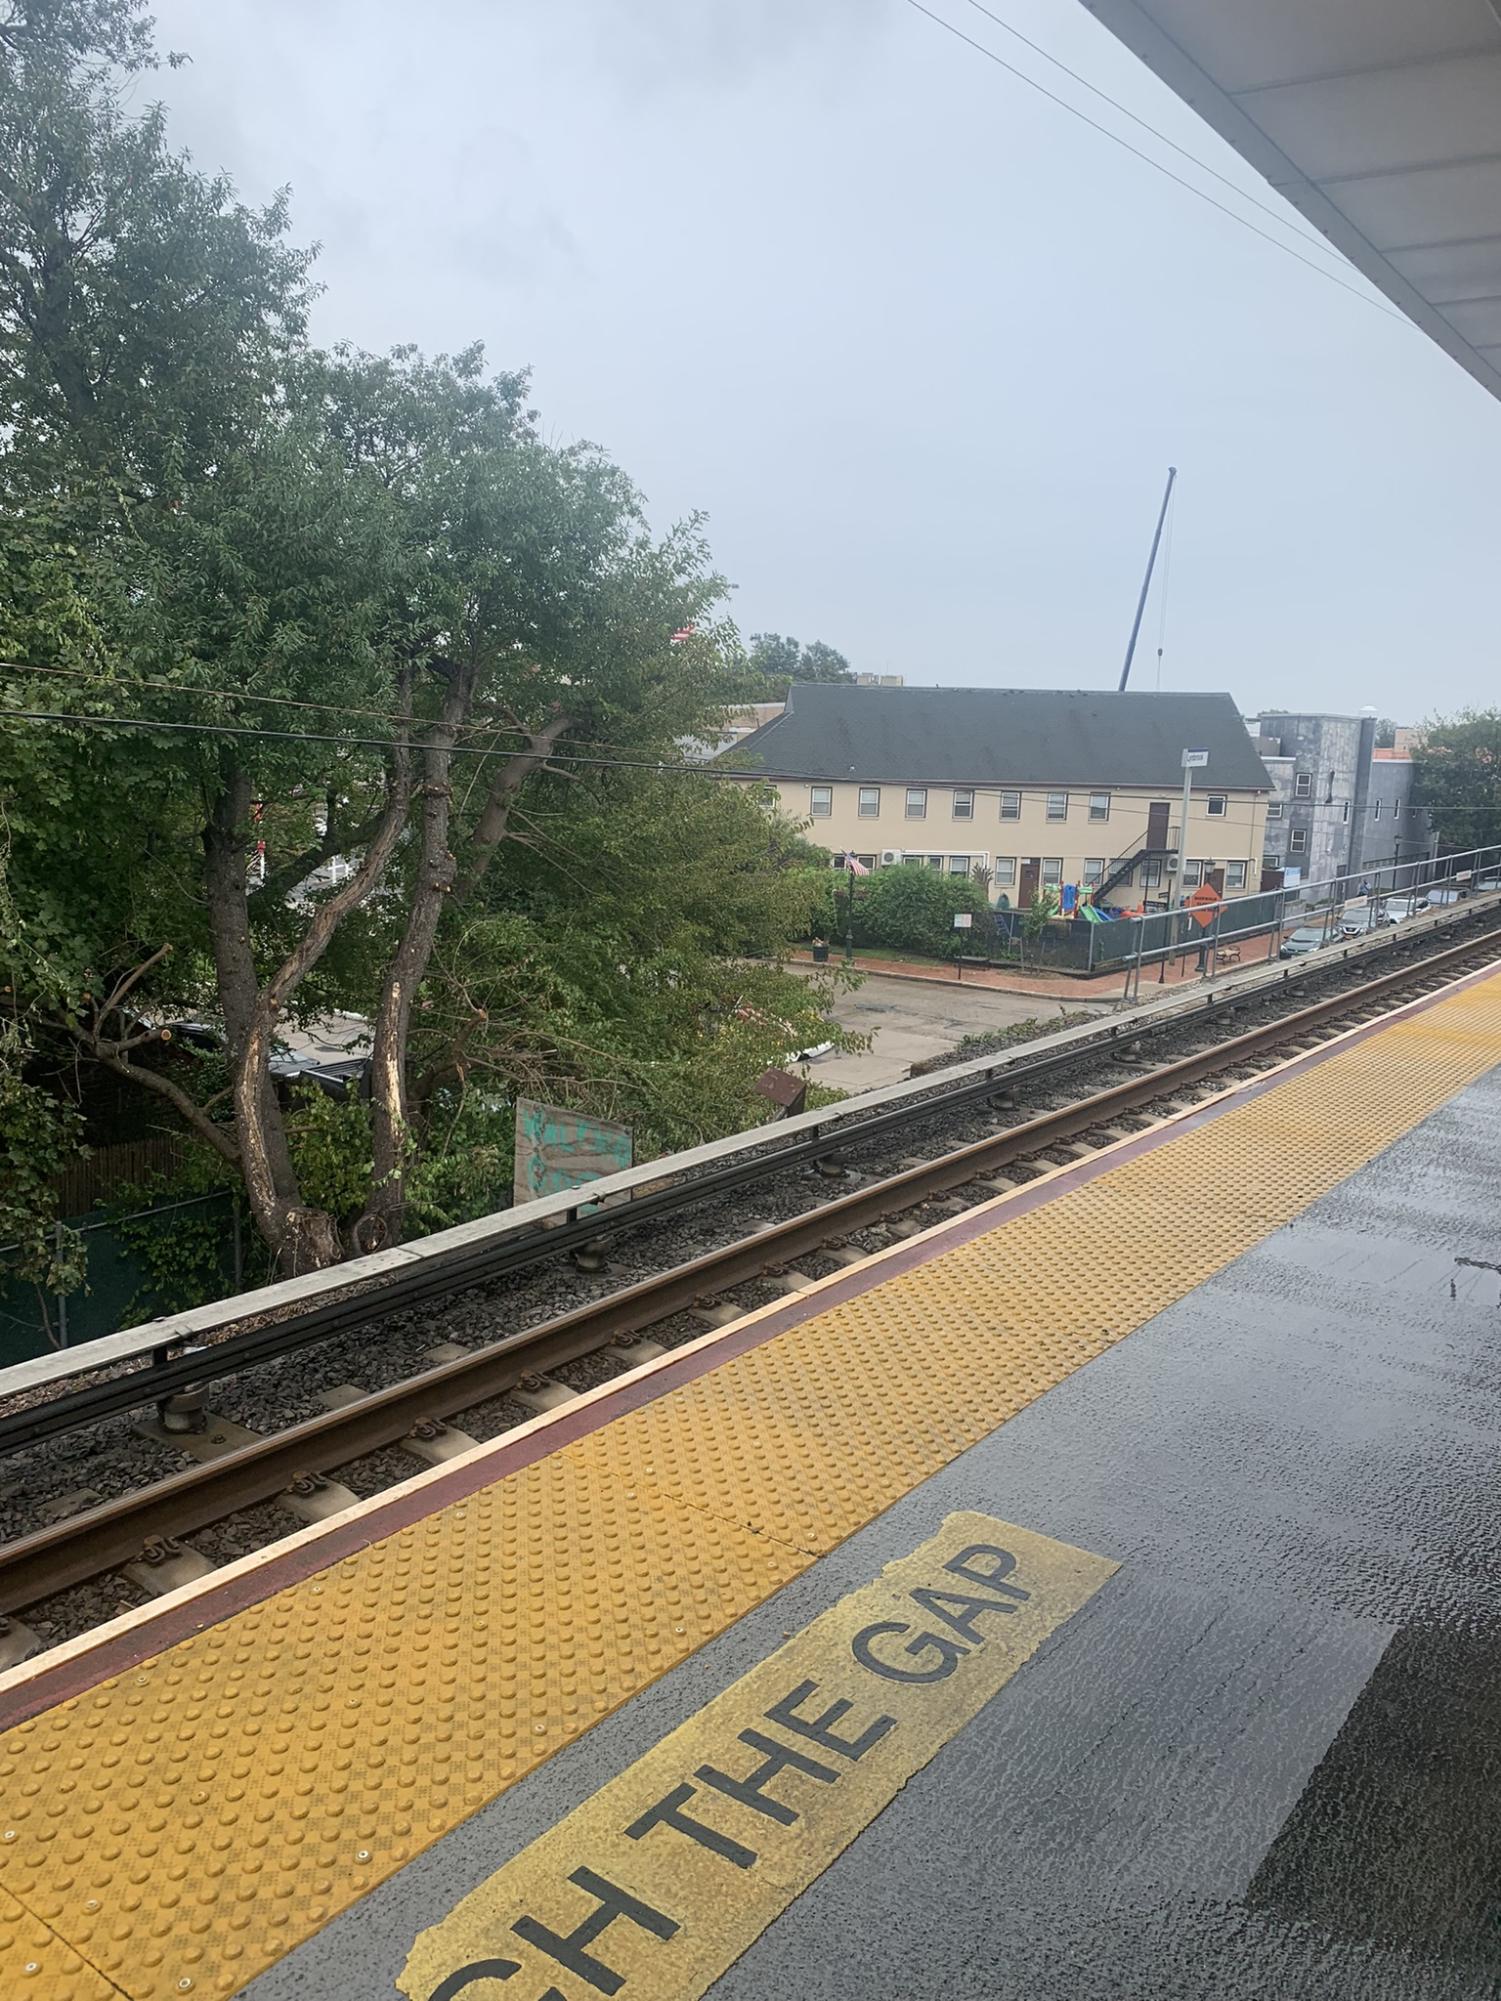 Waiting to head into NYC on the LIRR platform on the Lynbrook platform